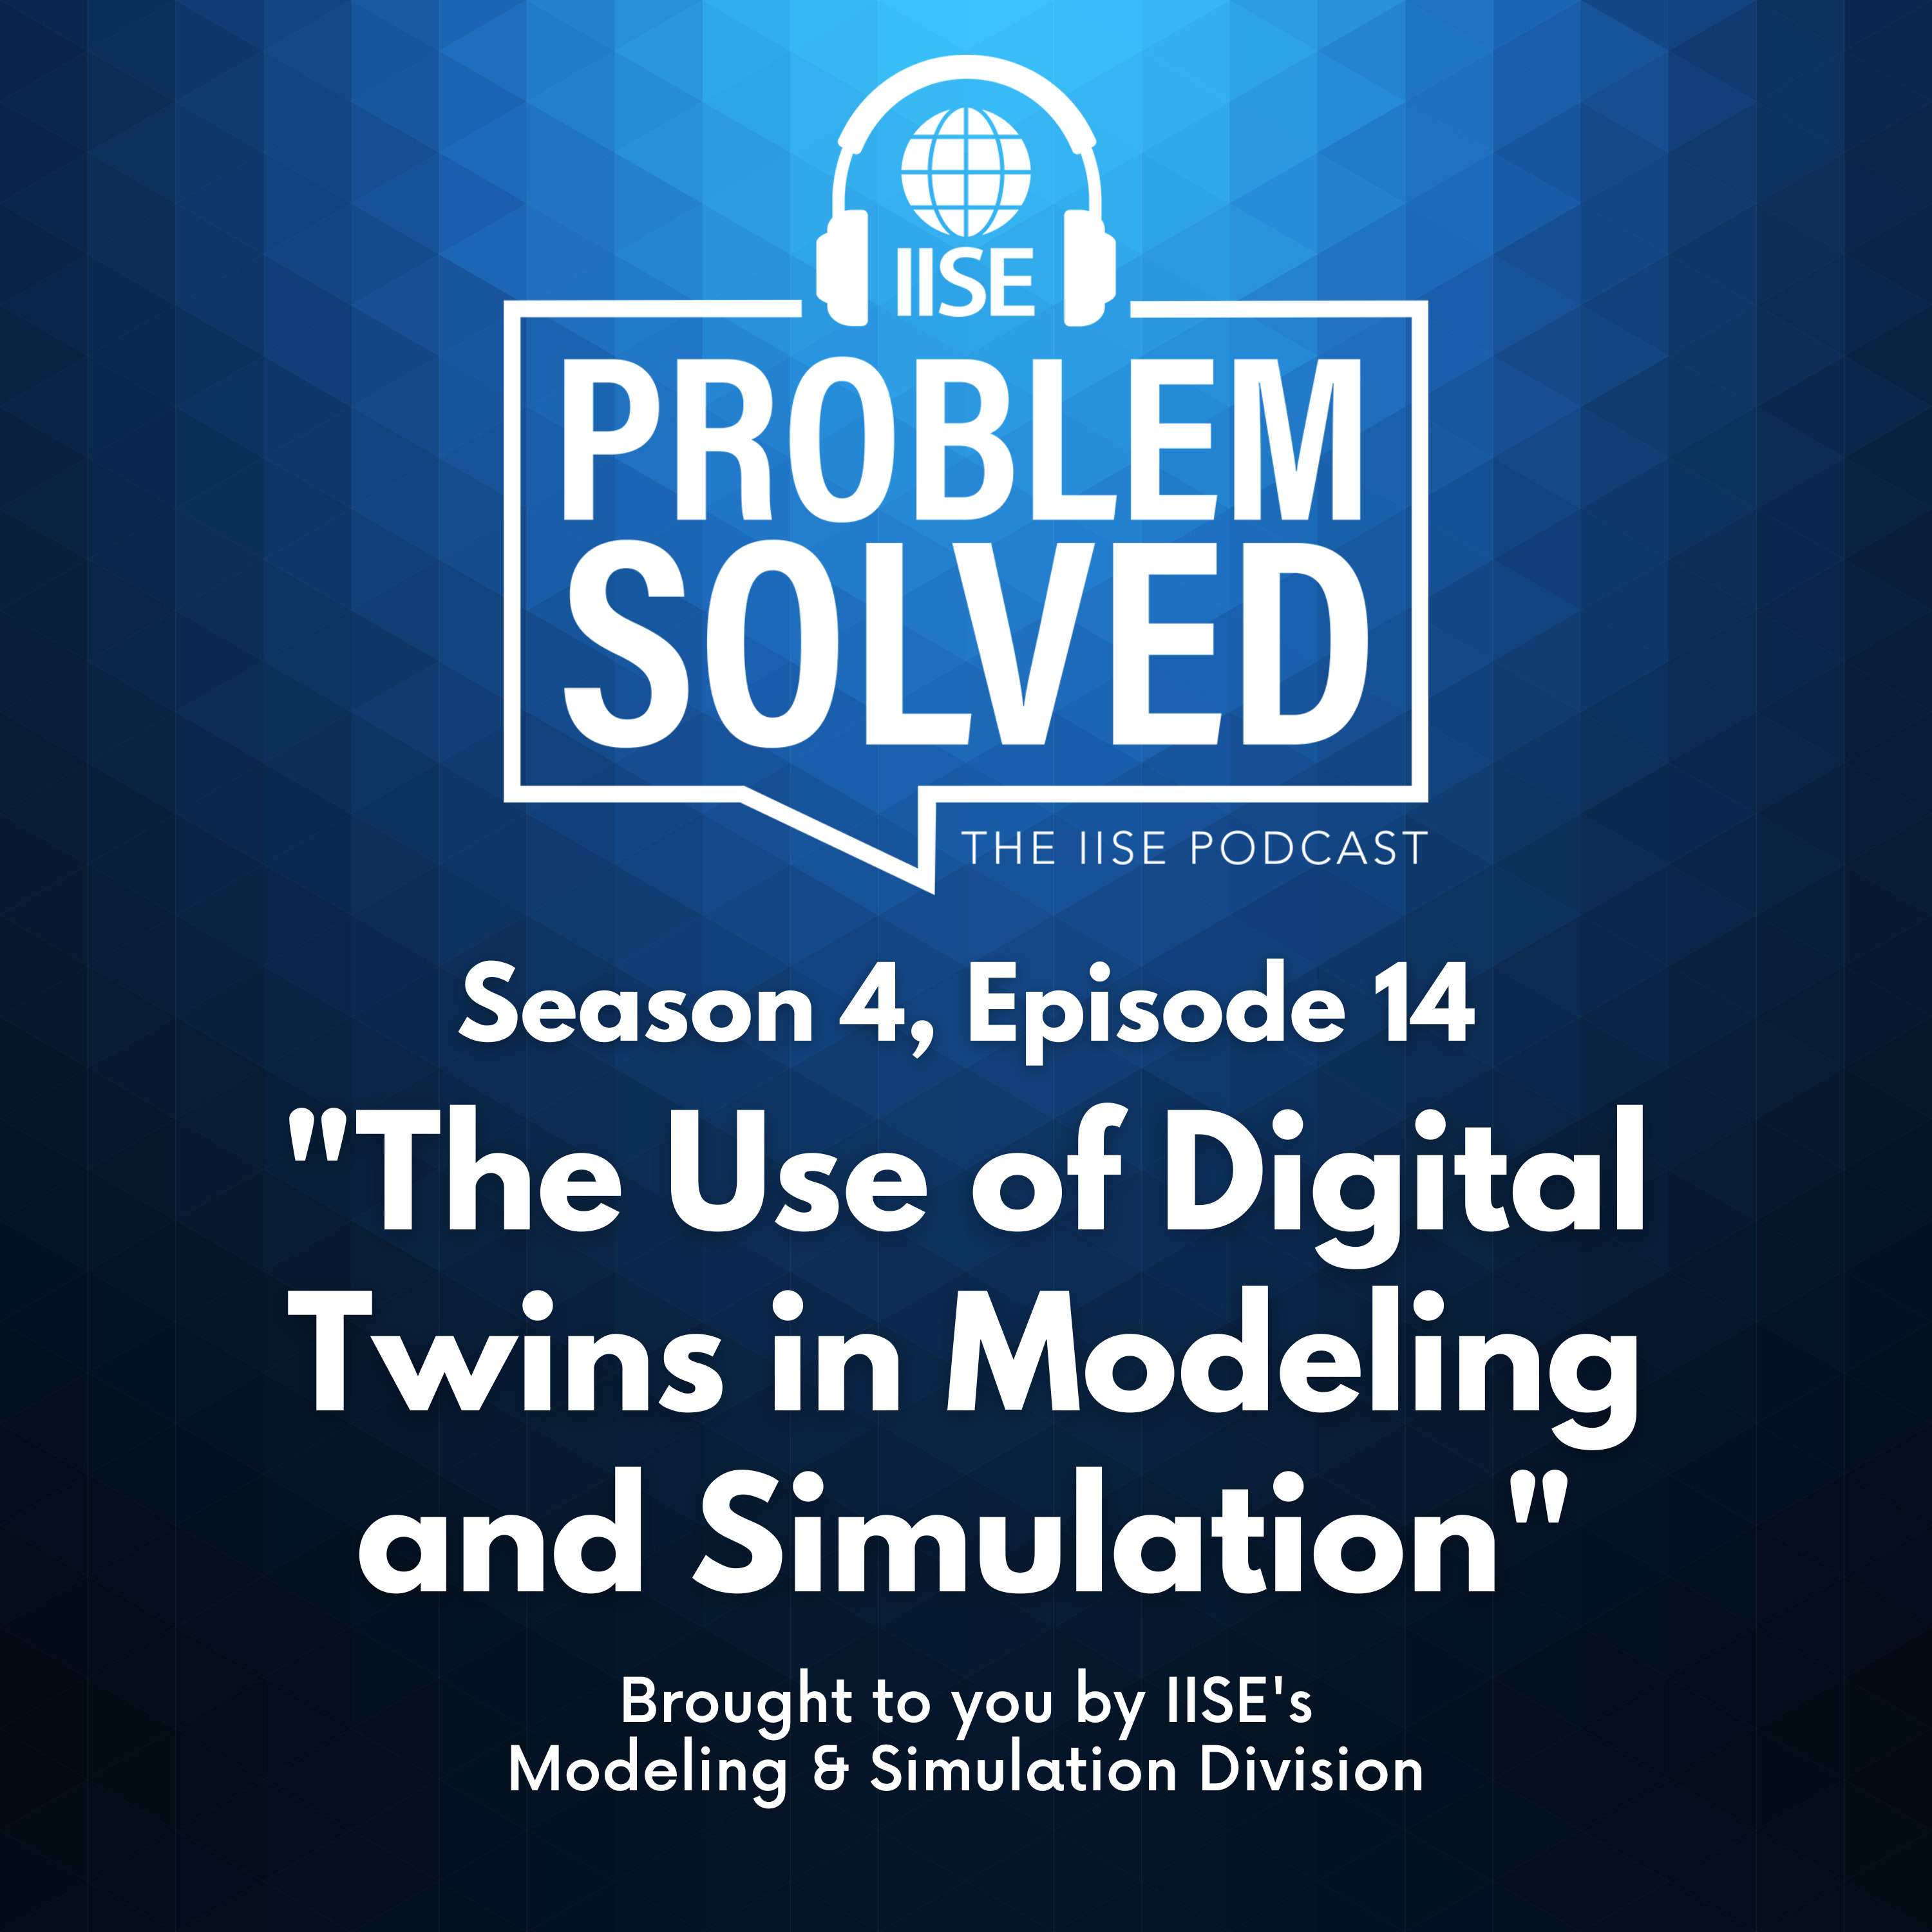 The Use of Digital Twins in Modeling and Simulation